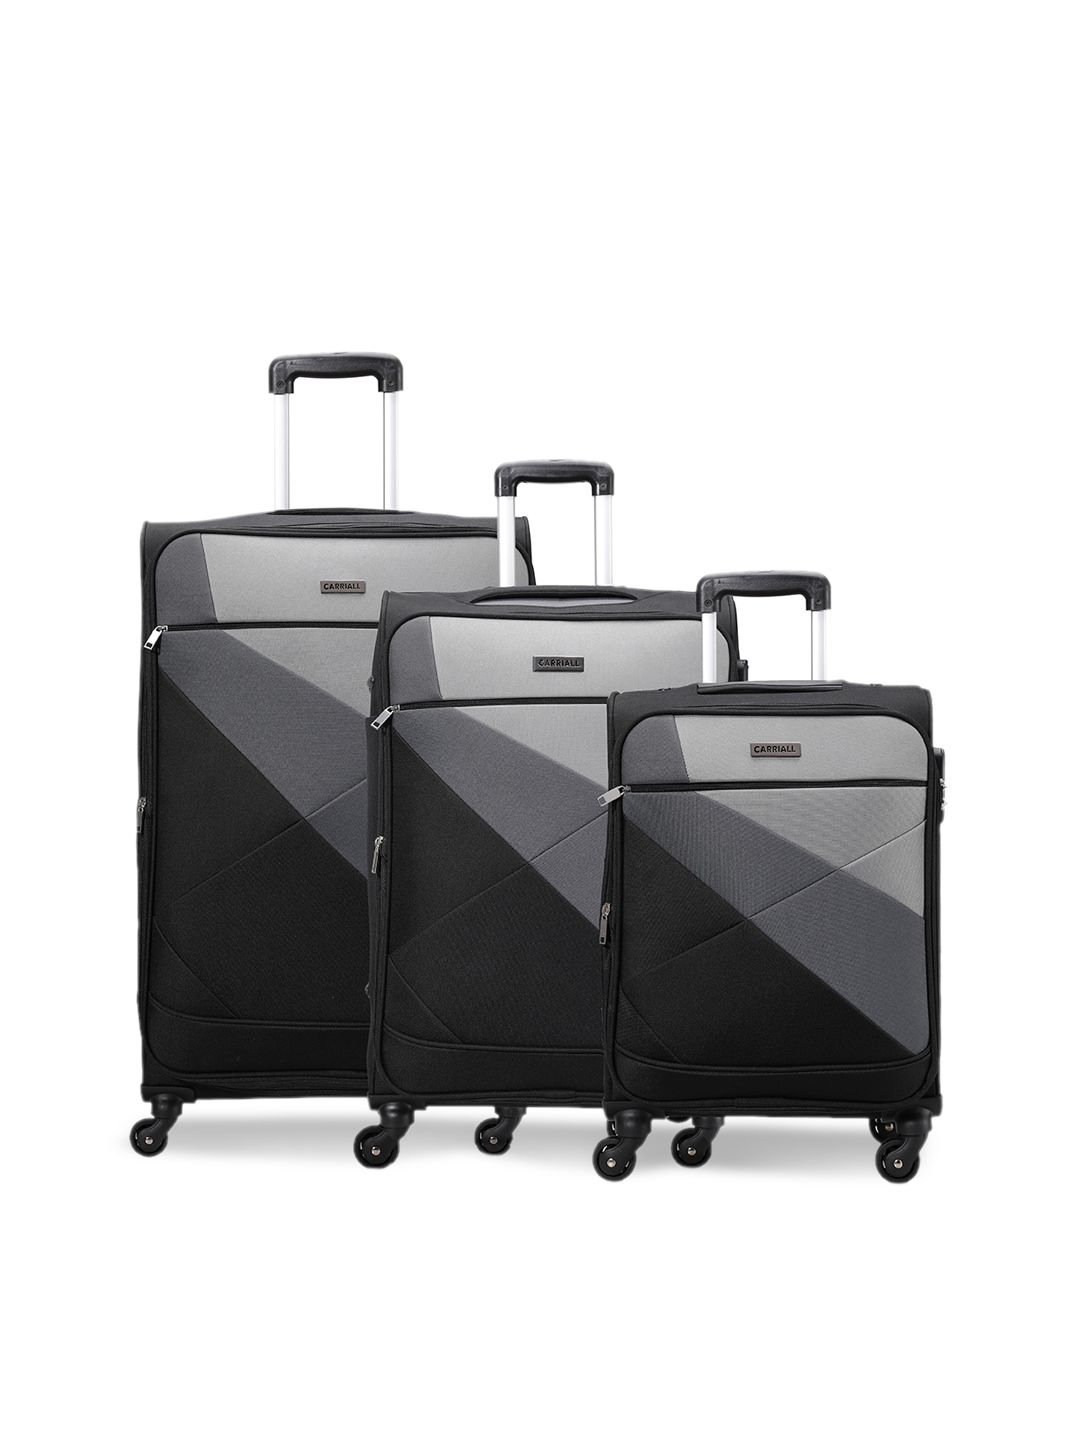 CARRIALL Set Of 3 Black & Grey Colourblocked Soft-Sided Trolley Suitcases Price in India